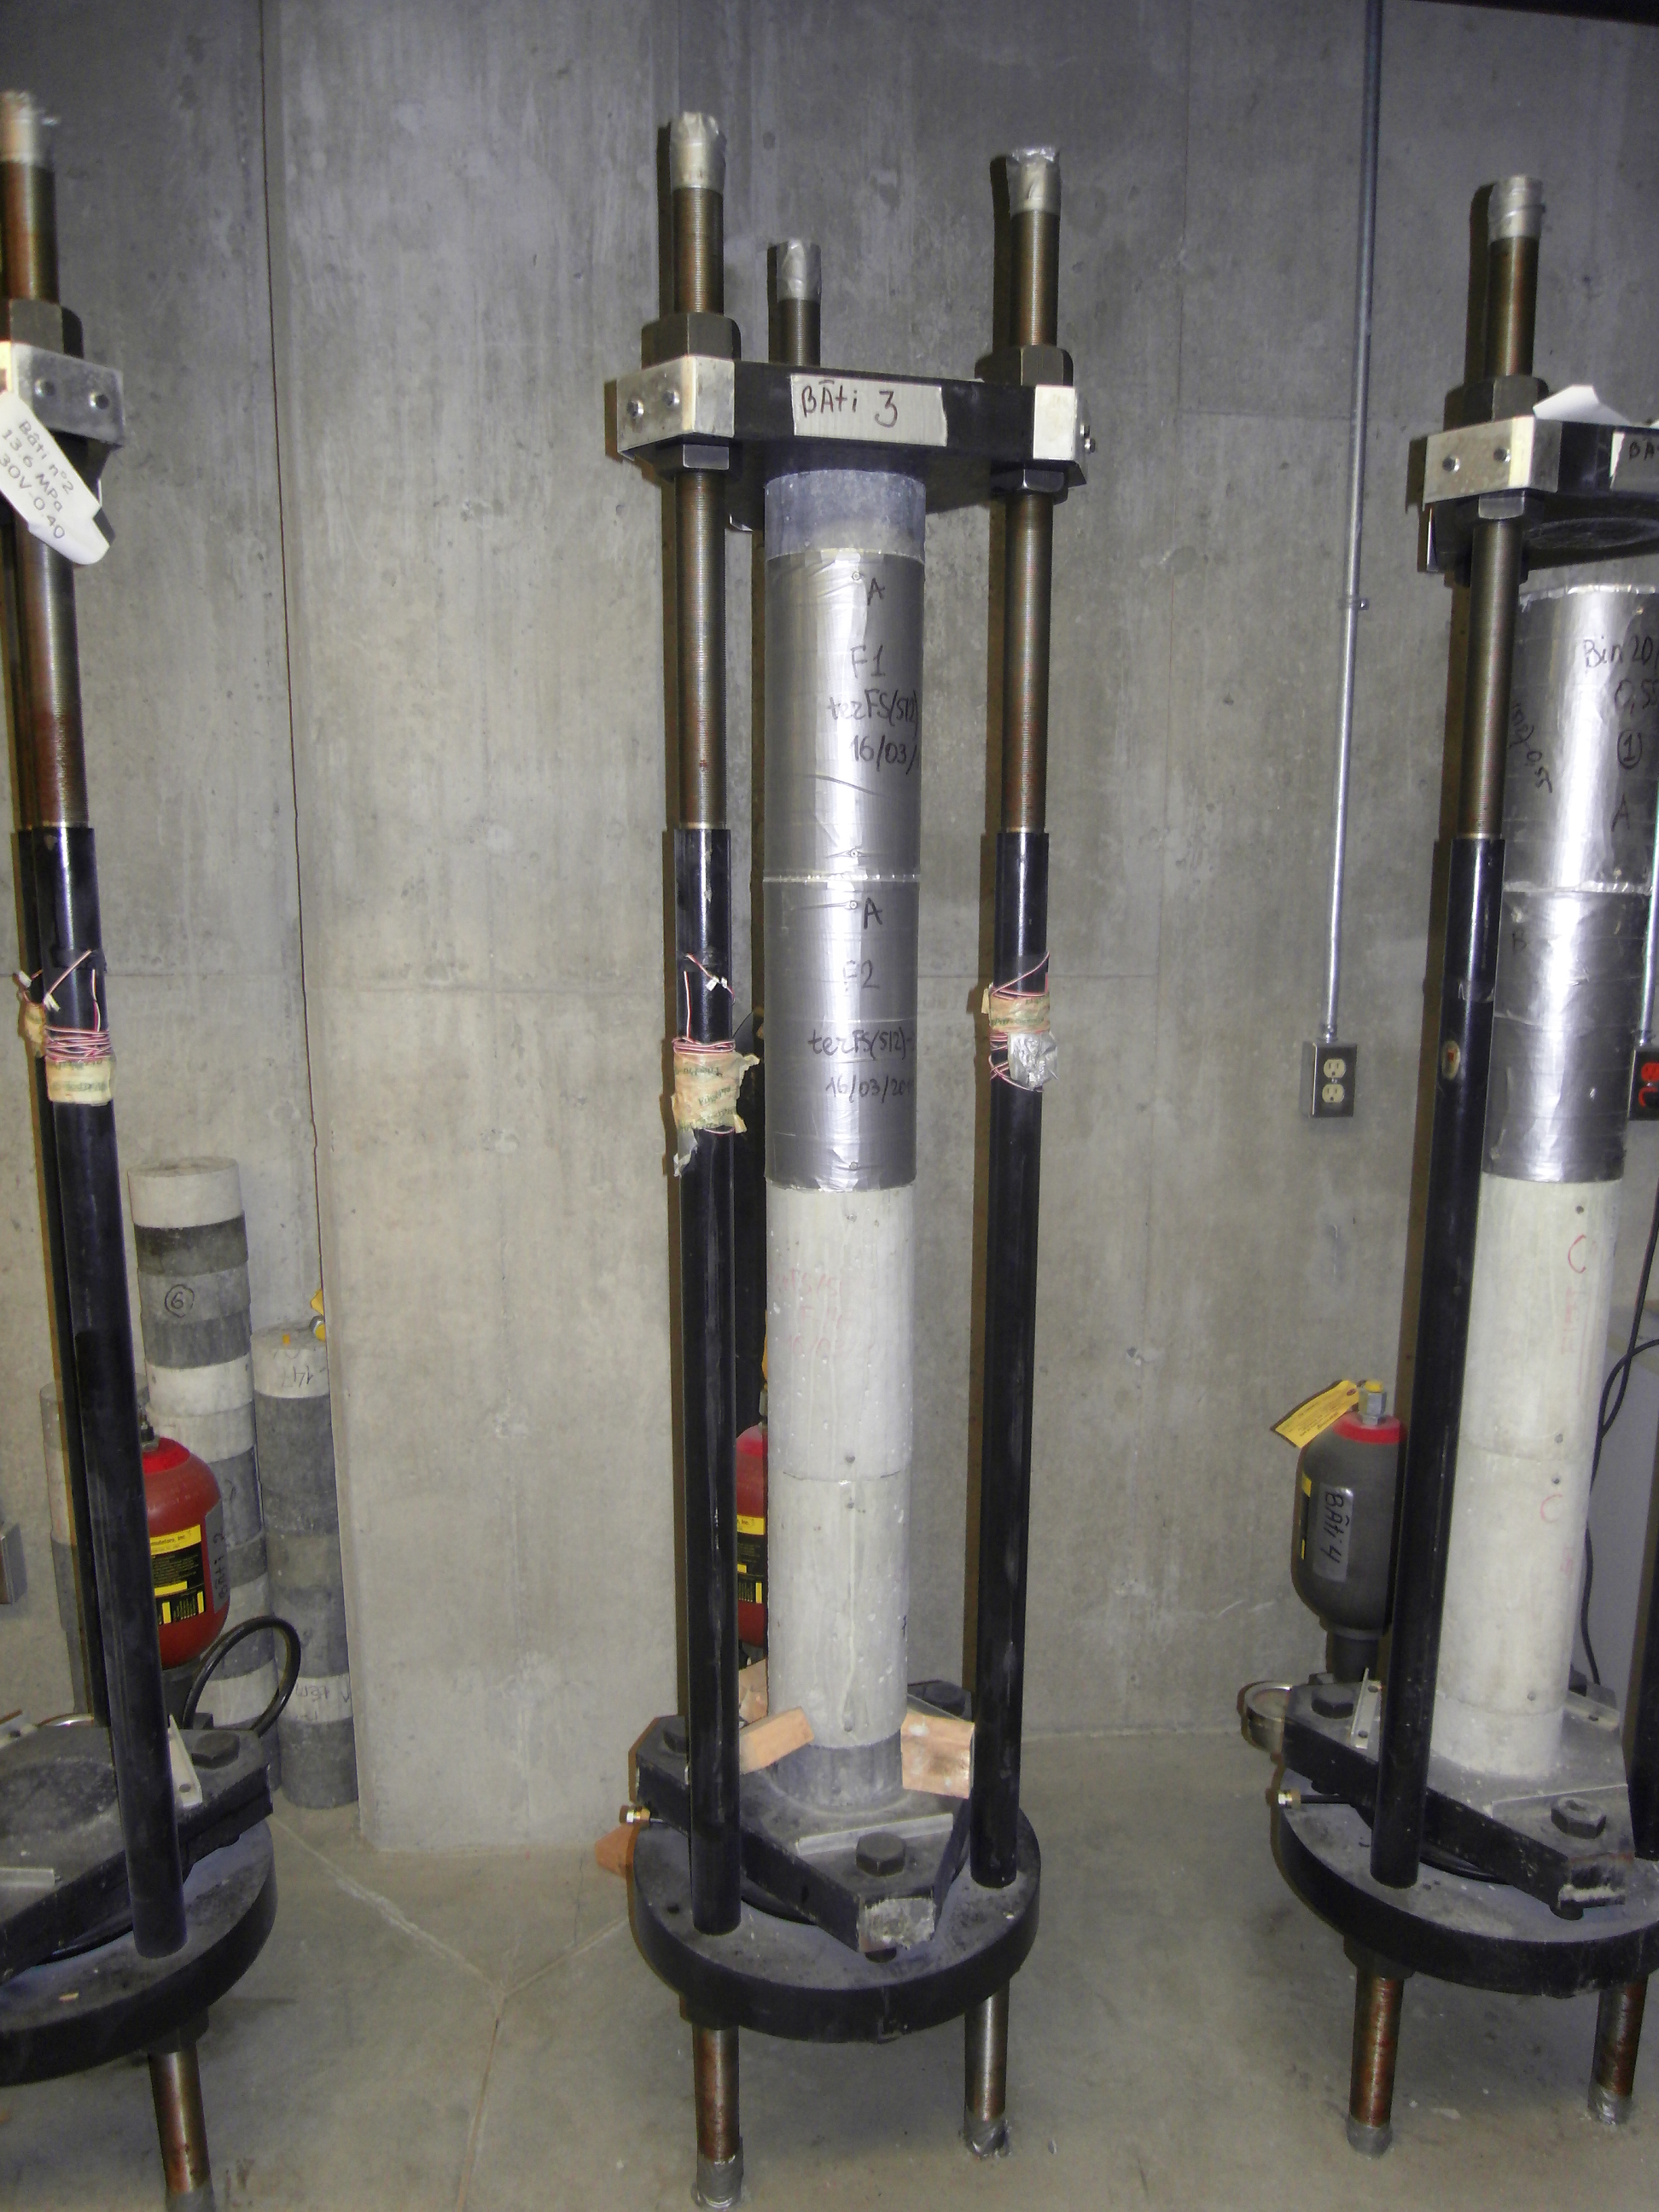 These are fabricated pieces of specialized equipment to test the creep measurement of high-strength concrete.